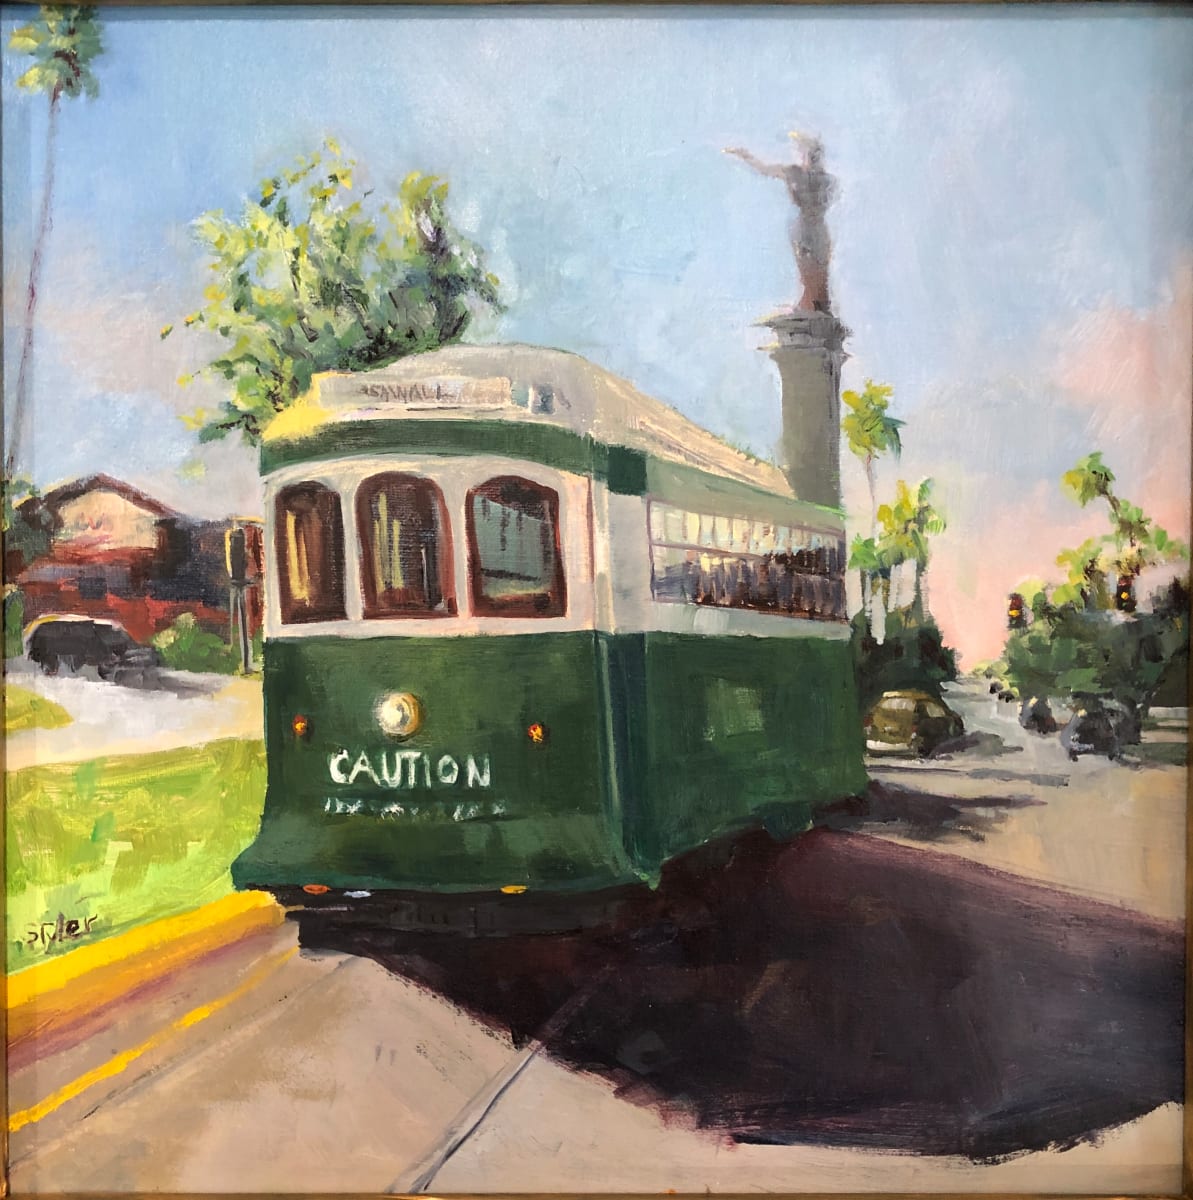 Tolley headed to the Seawall  Image: The wonderful Trolleys are back in Galveston